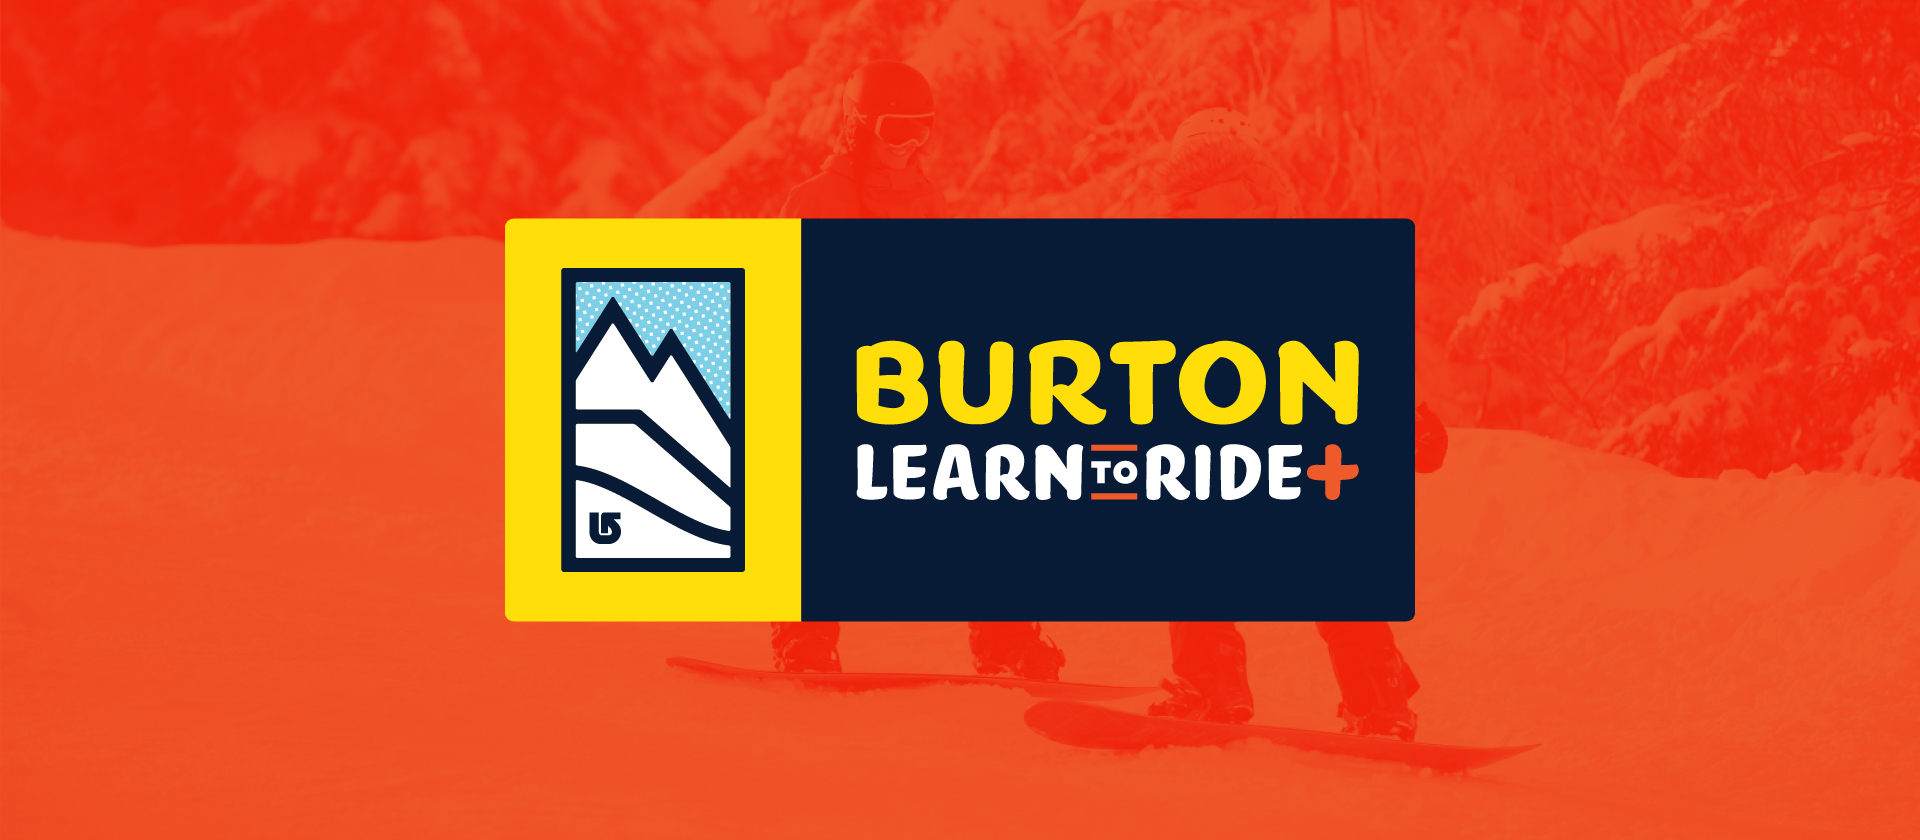 Burton Learn to ride Banner image